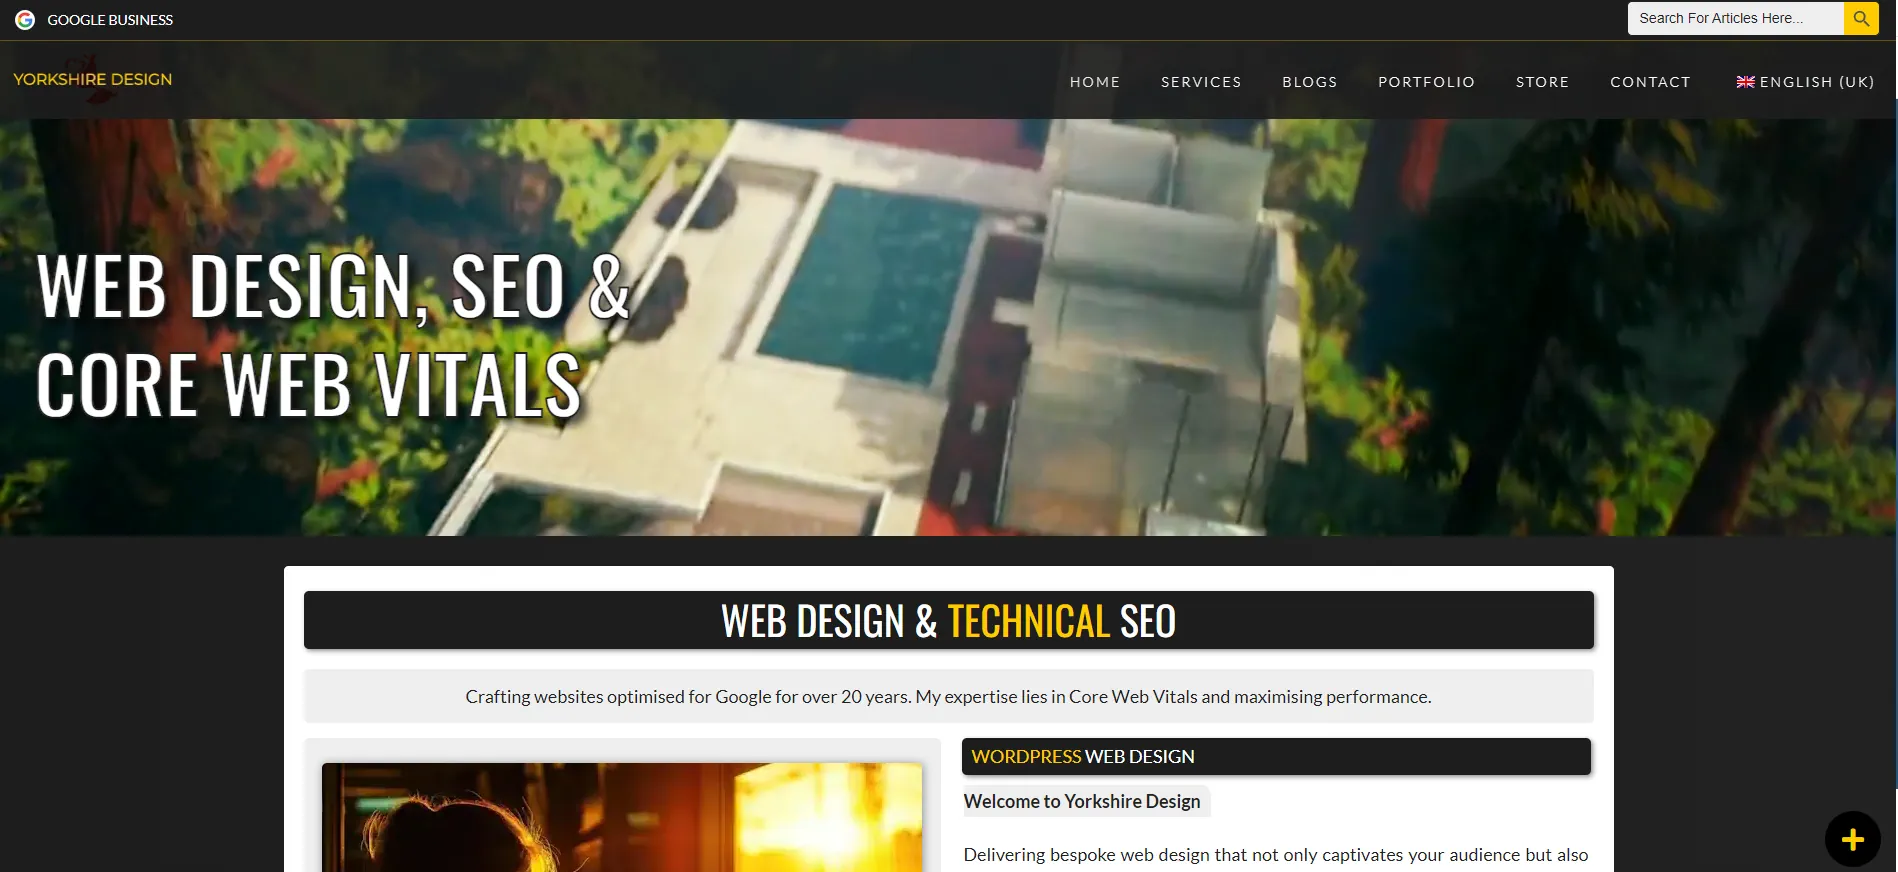 A screenshot of a website featuring a banner image of buildings and trees, with text overlaid reading "Web Design, SEO & Core Web Vitals". Below, sections titled "Web Design & Technical SEO" and "Yorkshire Design" with links to various pages like Services, Blog, and Portfolio.